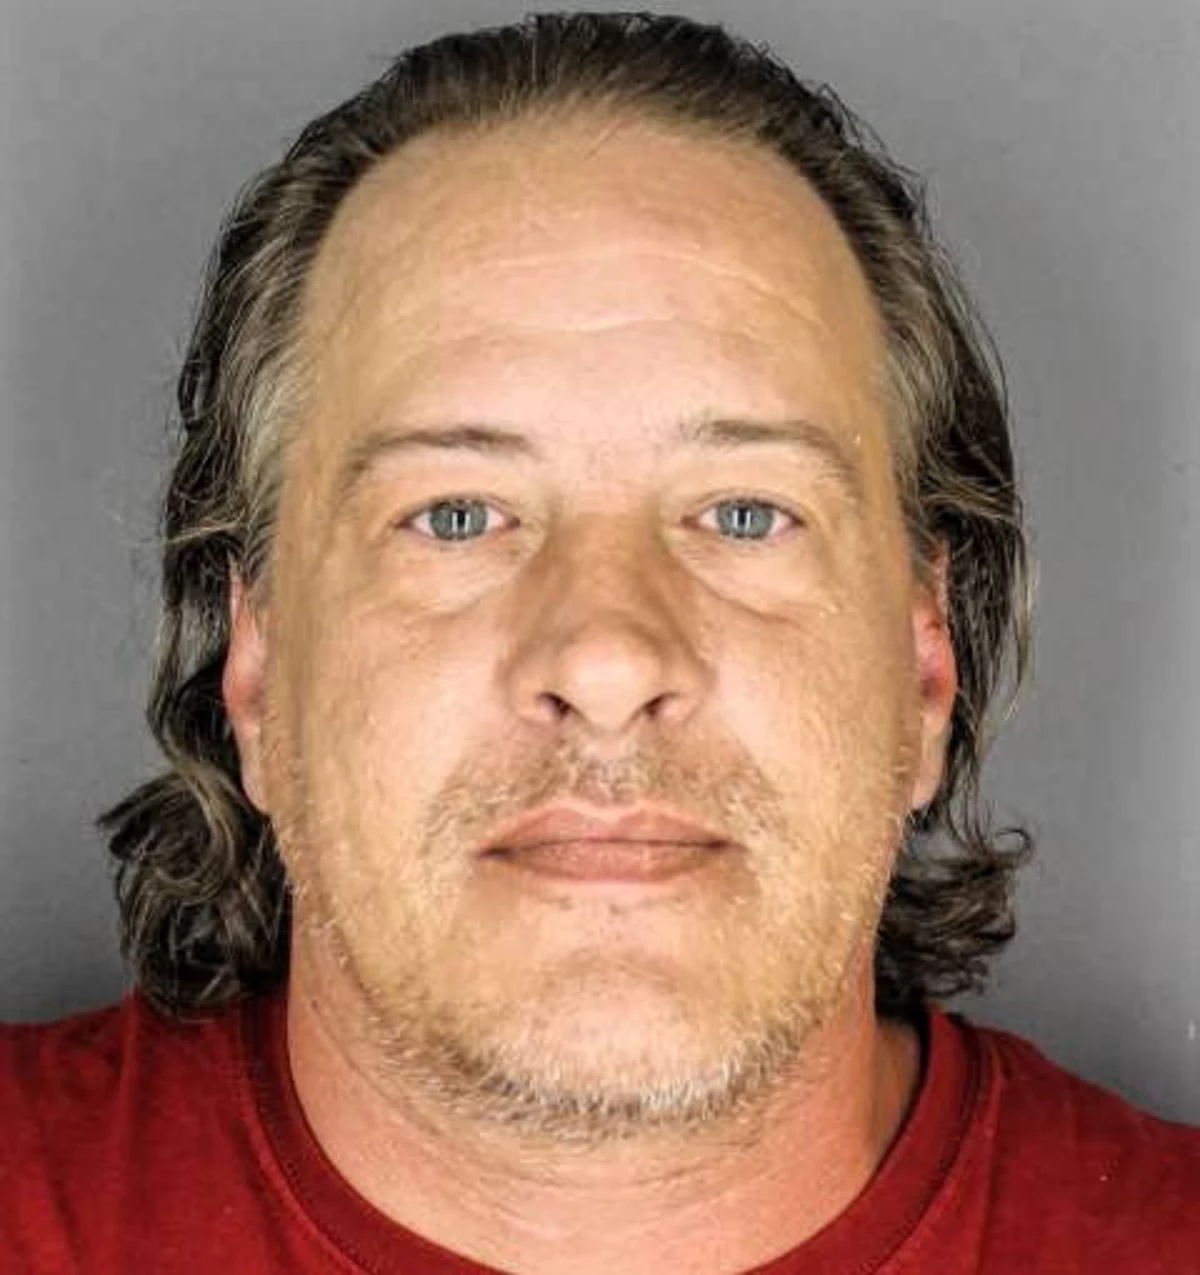 Man Charged For Lewd Act In Oneonta